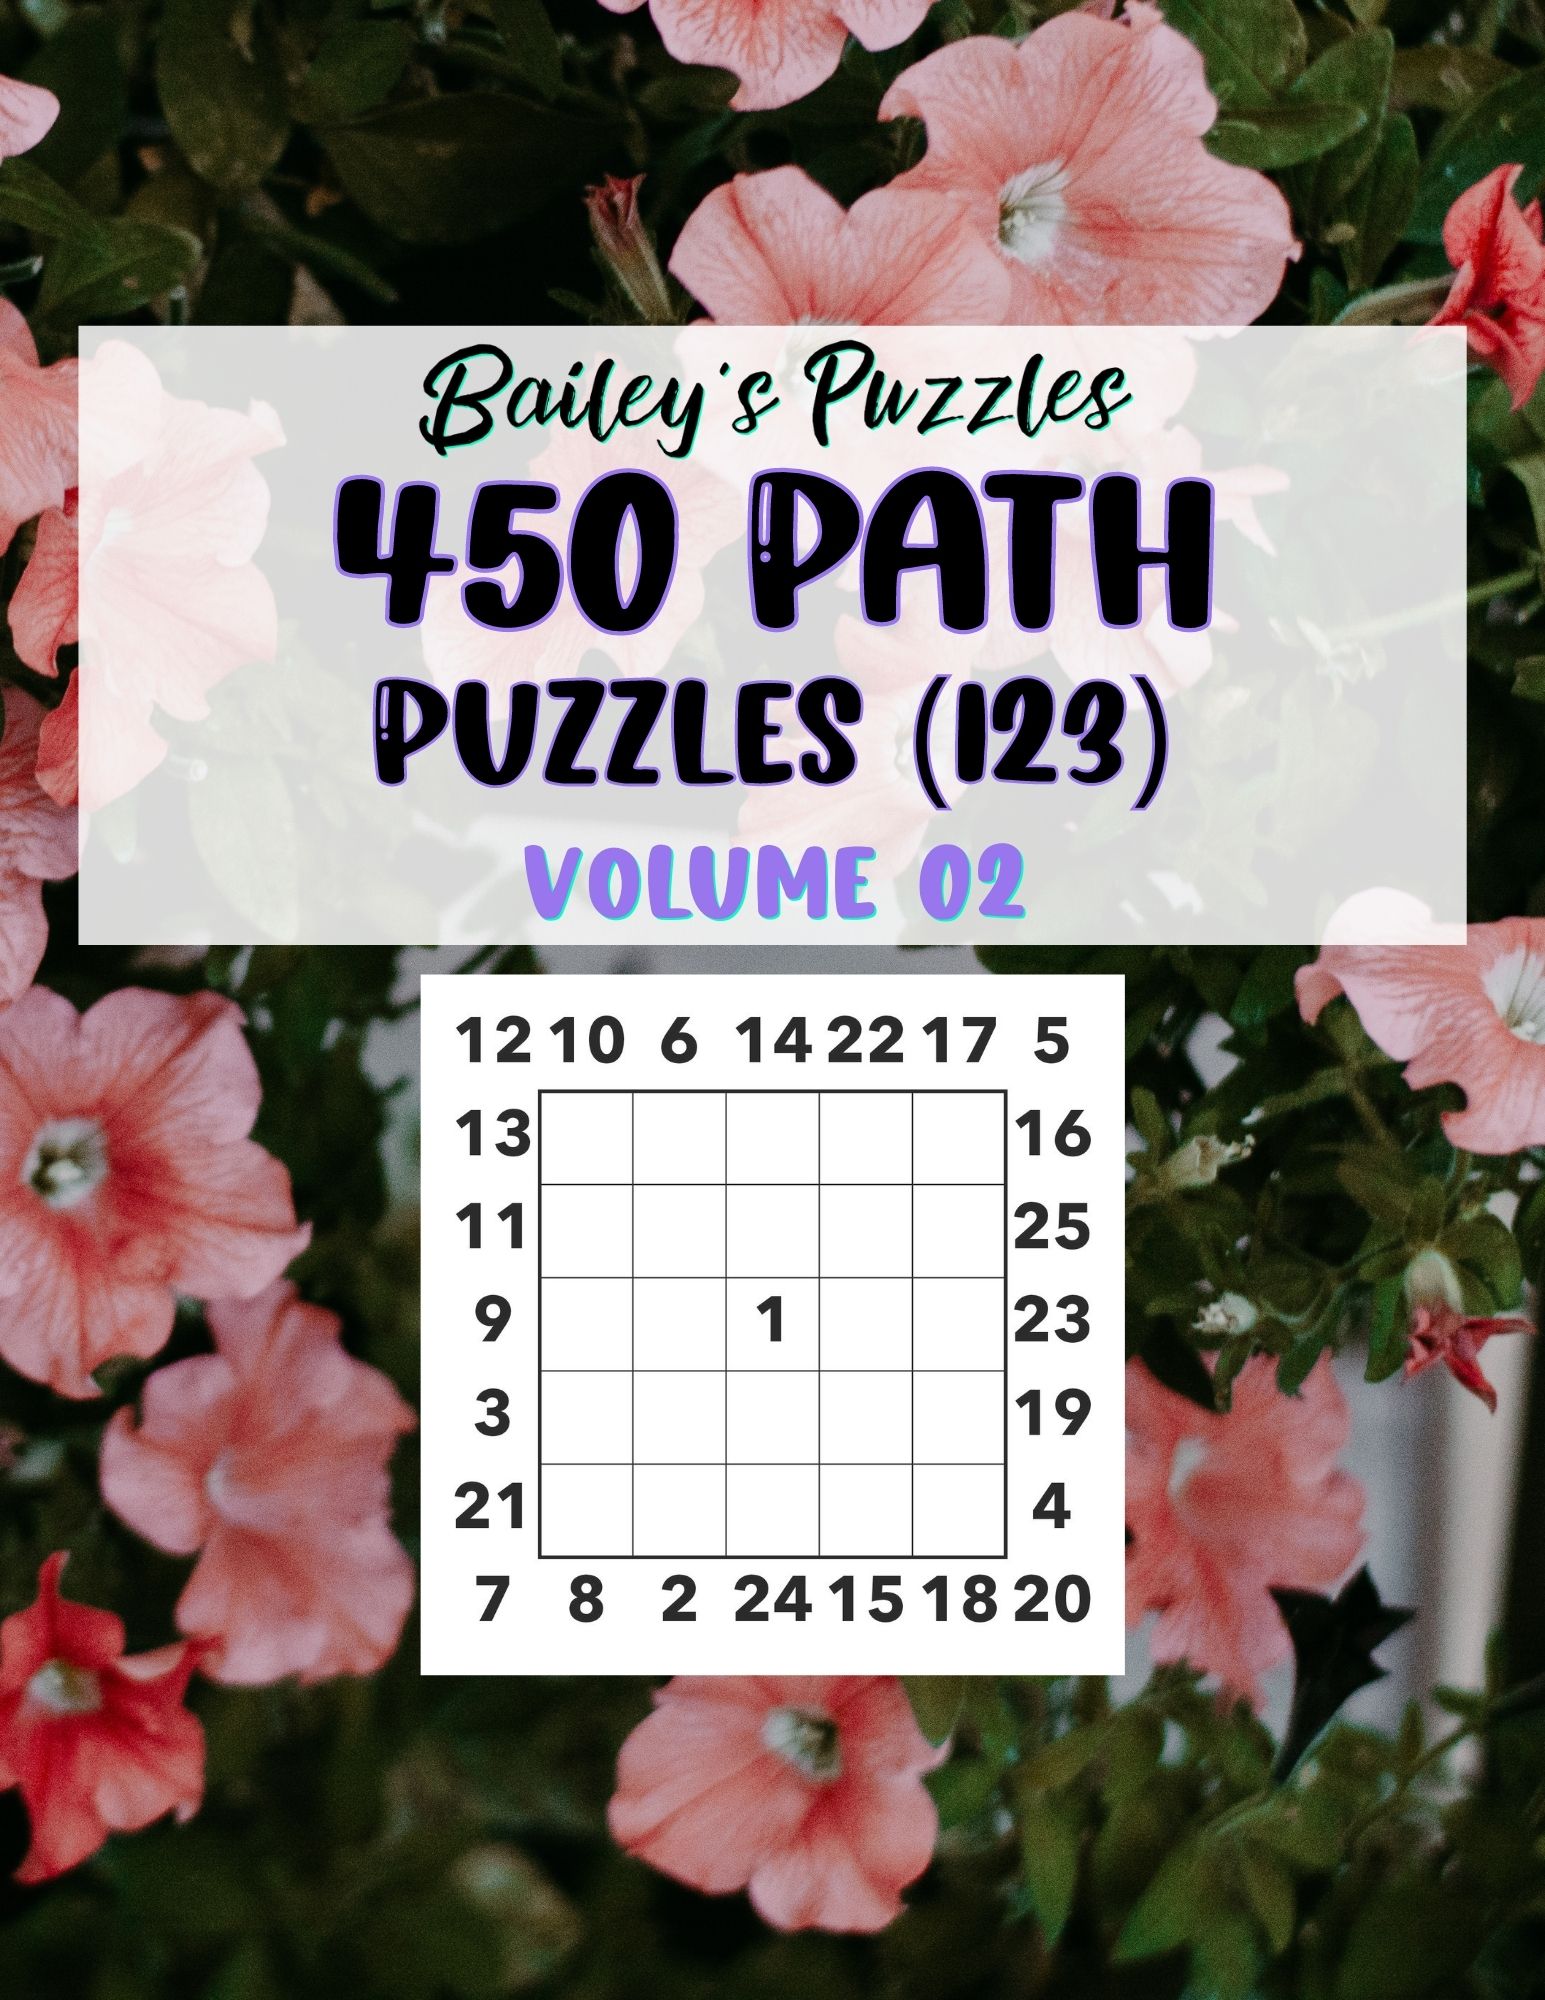 Front Cover - 450 Path Puzzles (123) volume 02